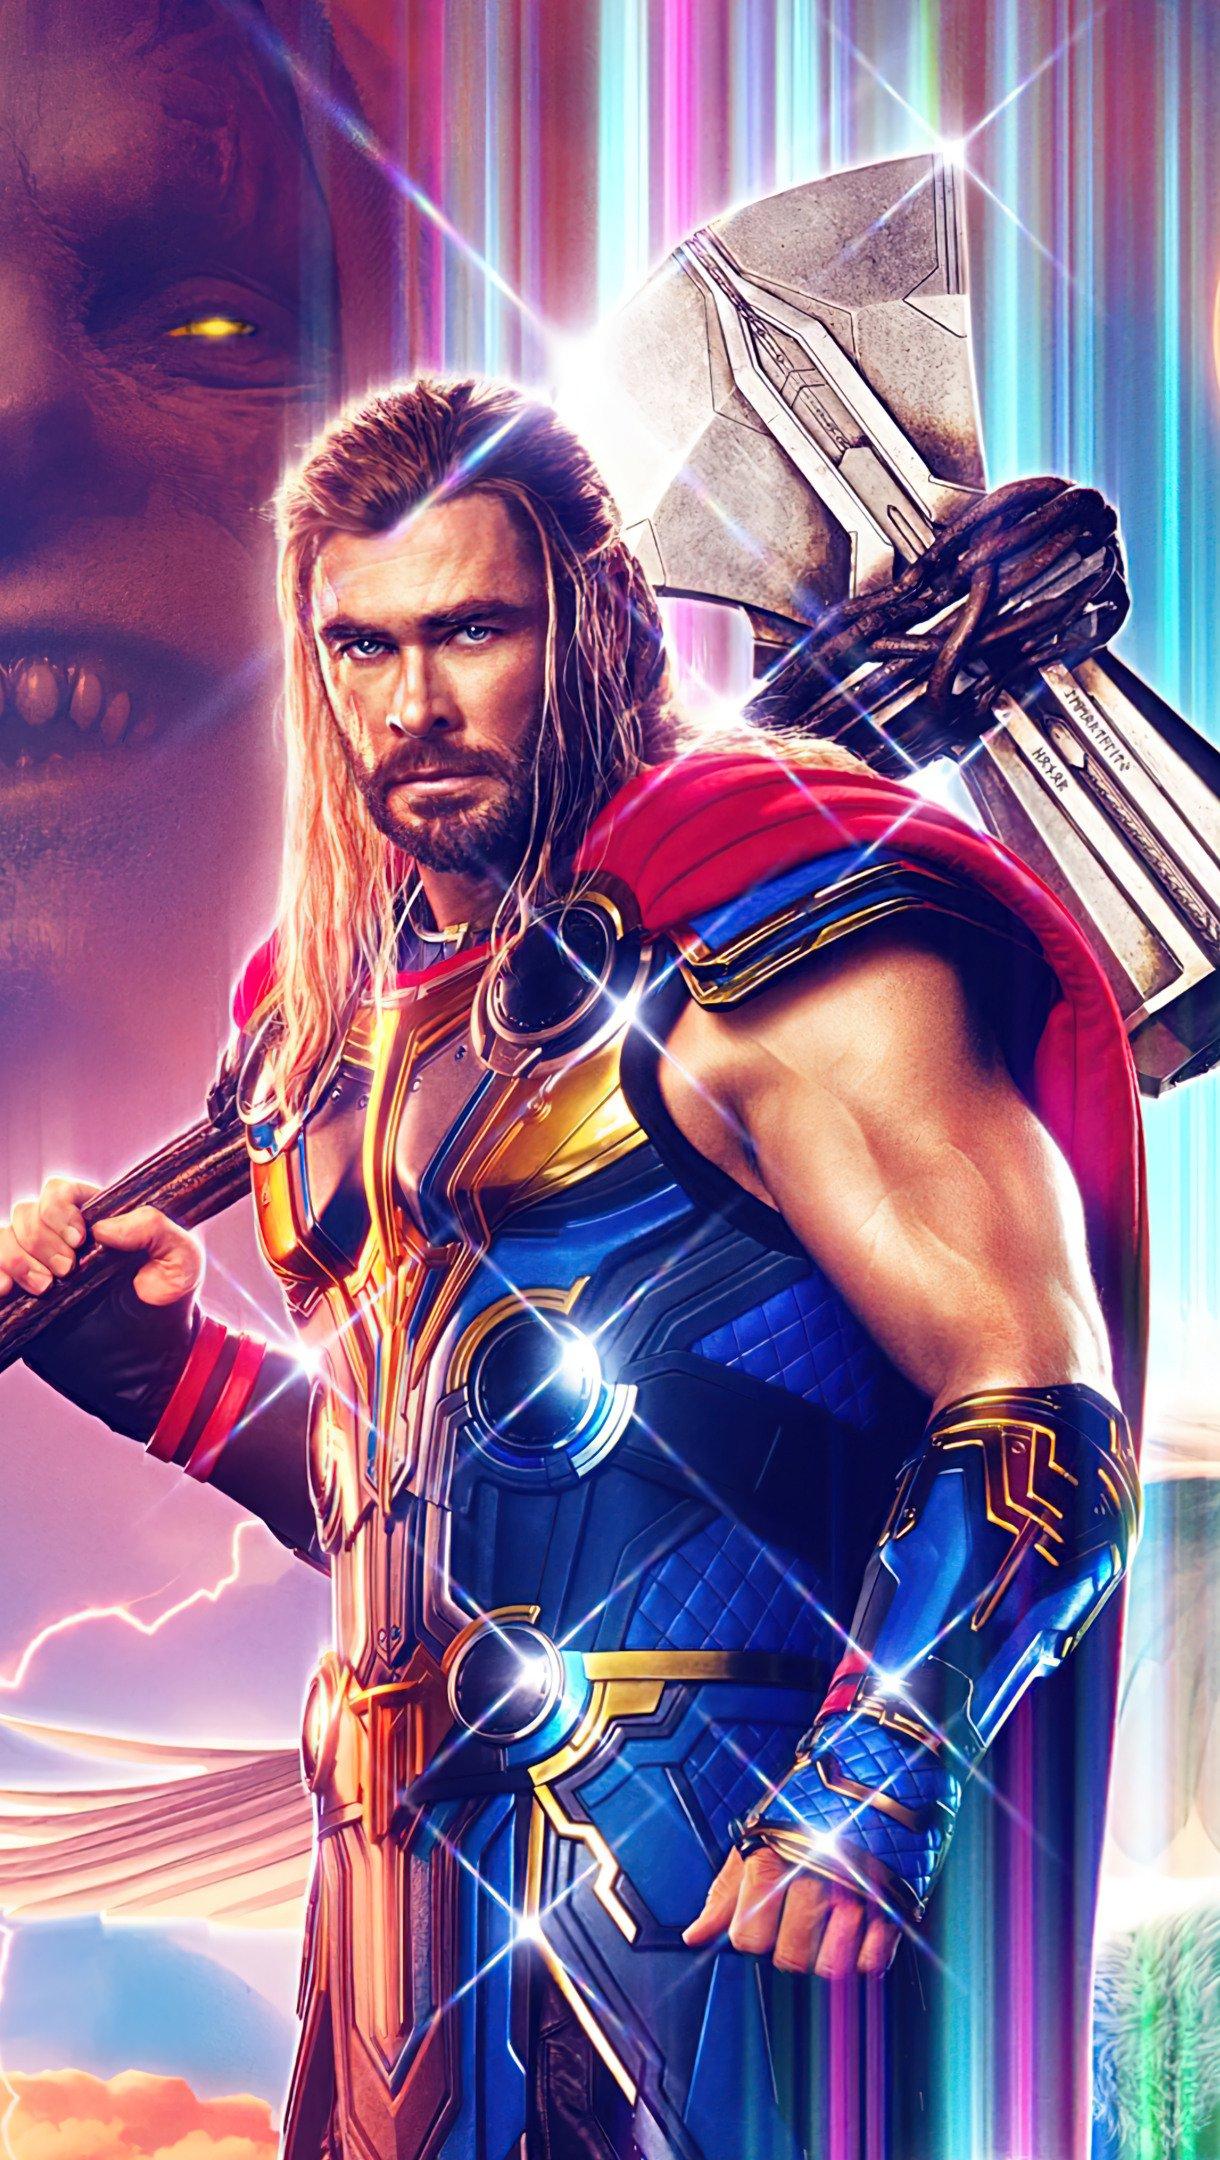 Thor Love And Thunder 4k Wallpapers Top Free Thor Love And Thunder 4k